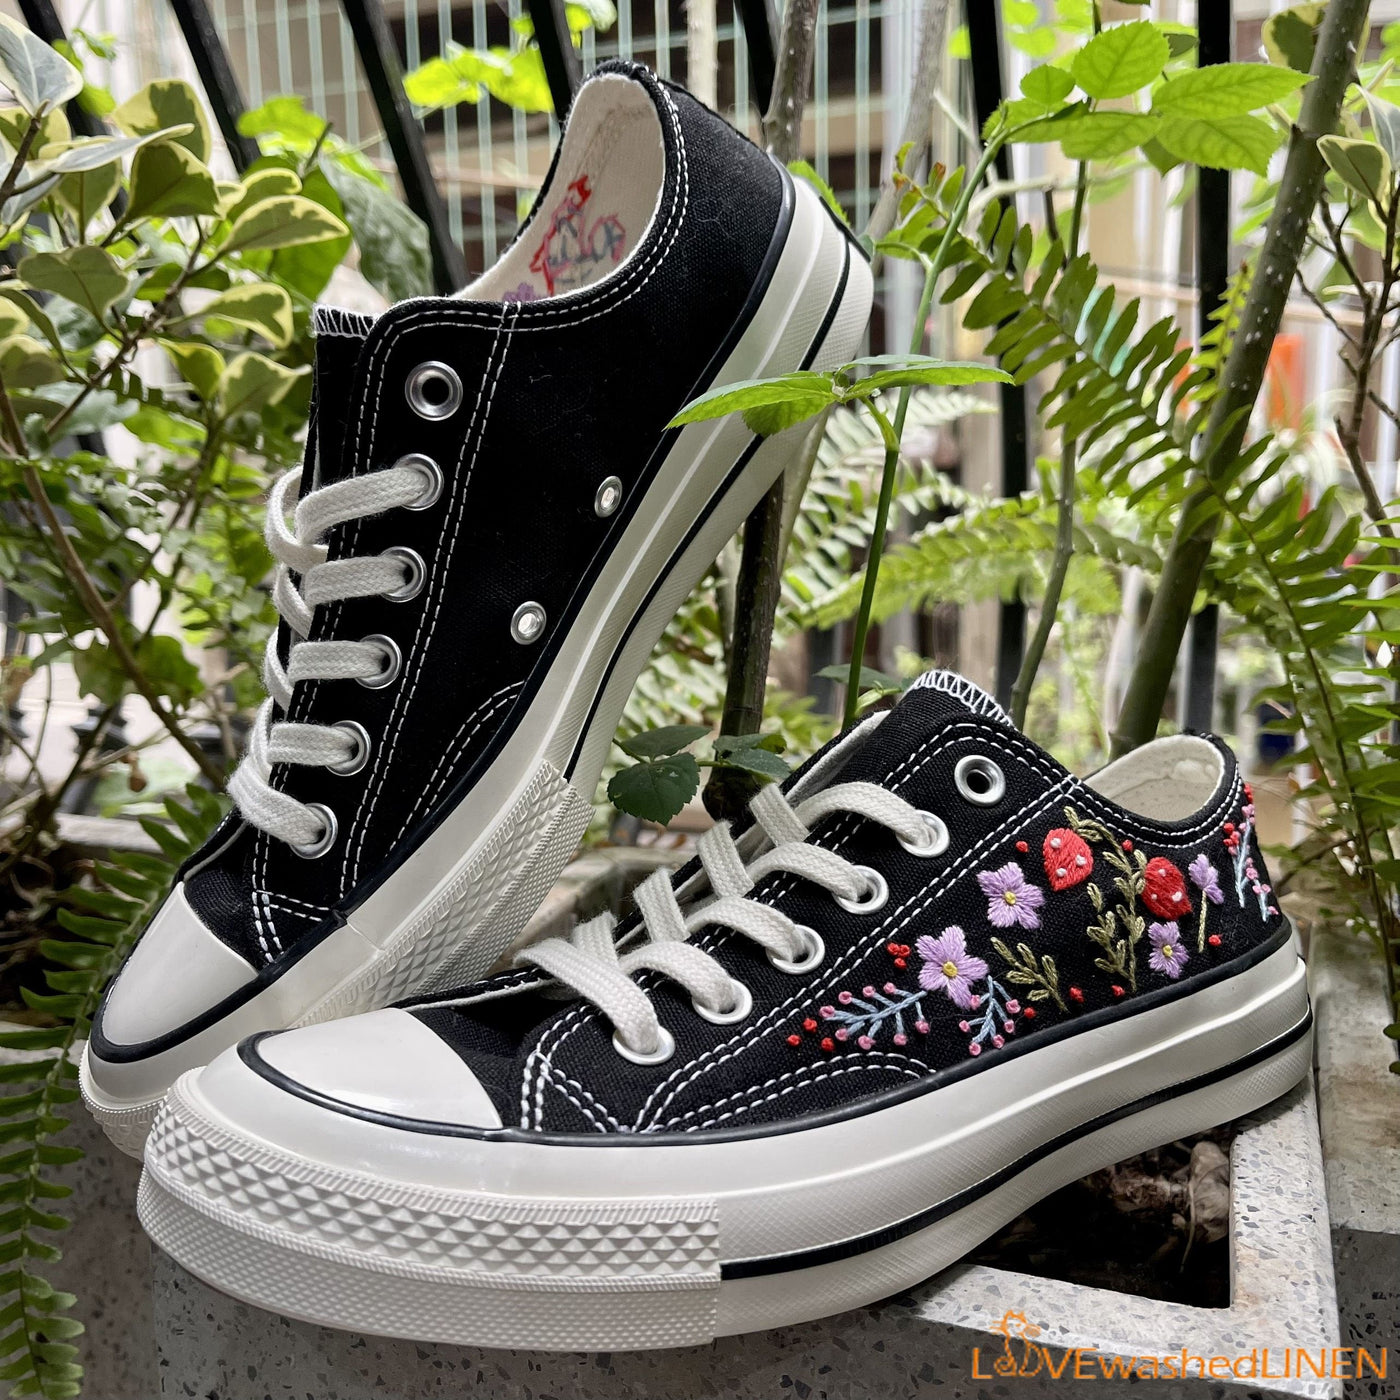 Embroidered Converse Custom, Embroidered Flowers, Wedding Shoes